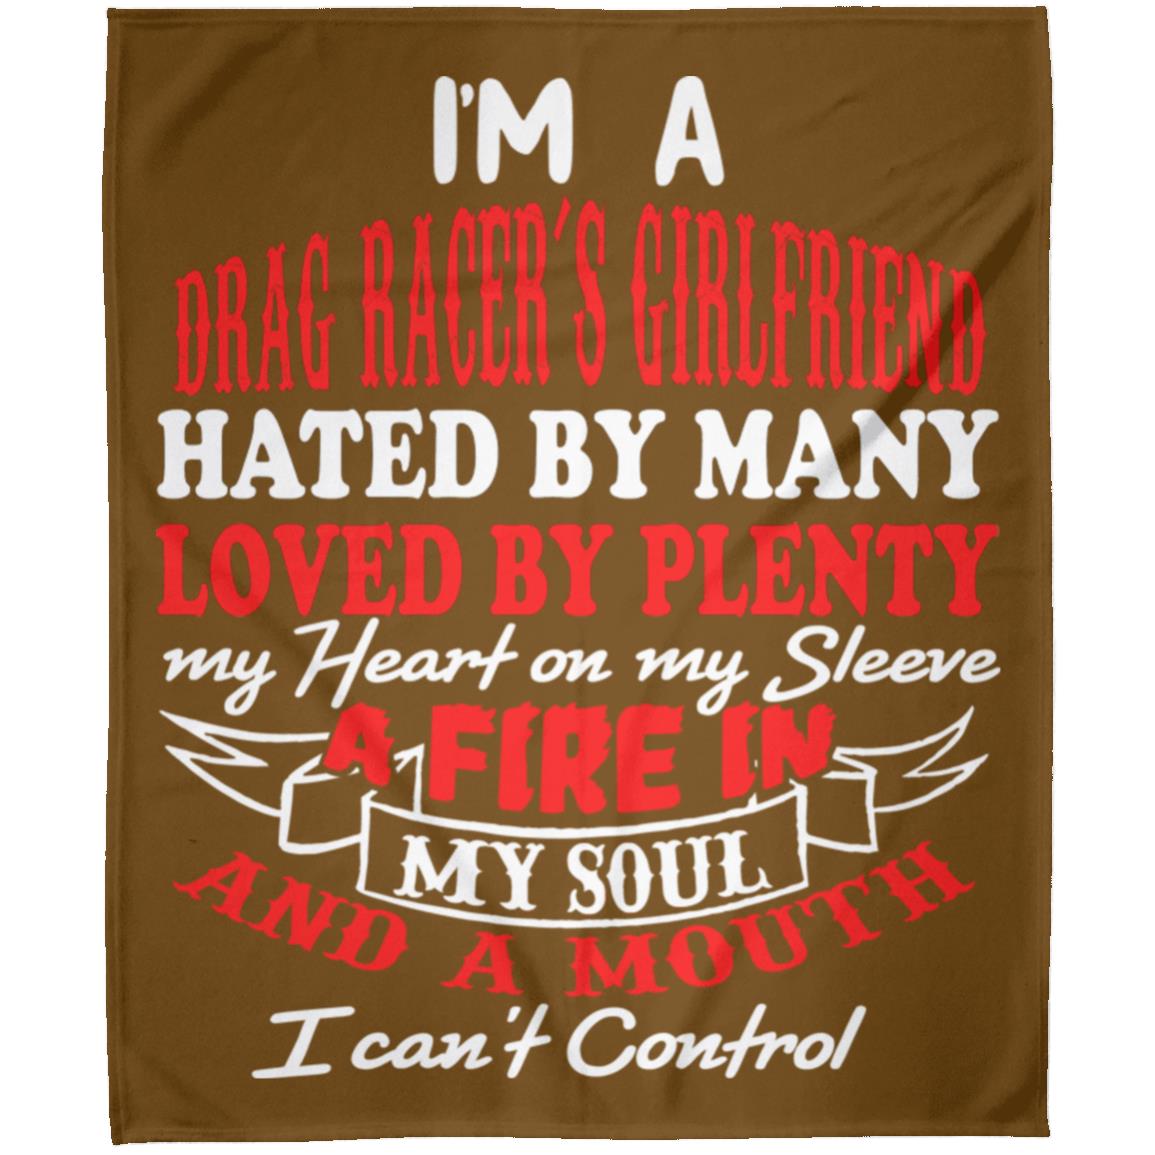 I'm A Drag Racer's Girlfriend Hated By Many Loved By Plenty Arctic Fleece Blanket 50x60